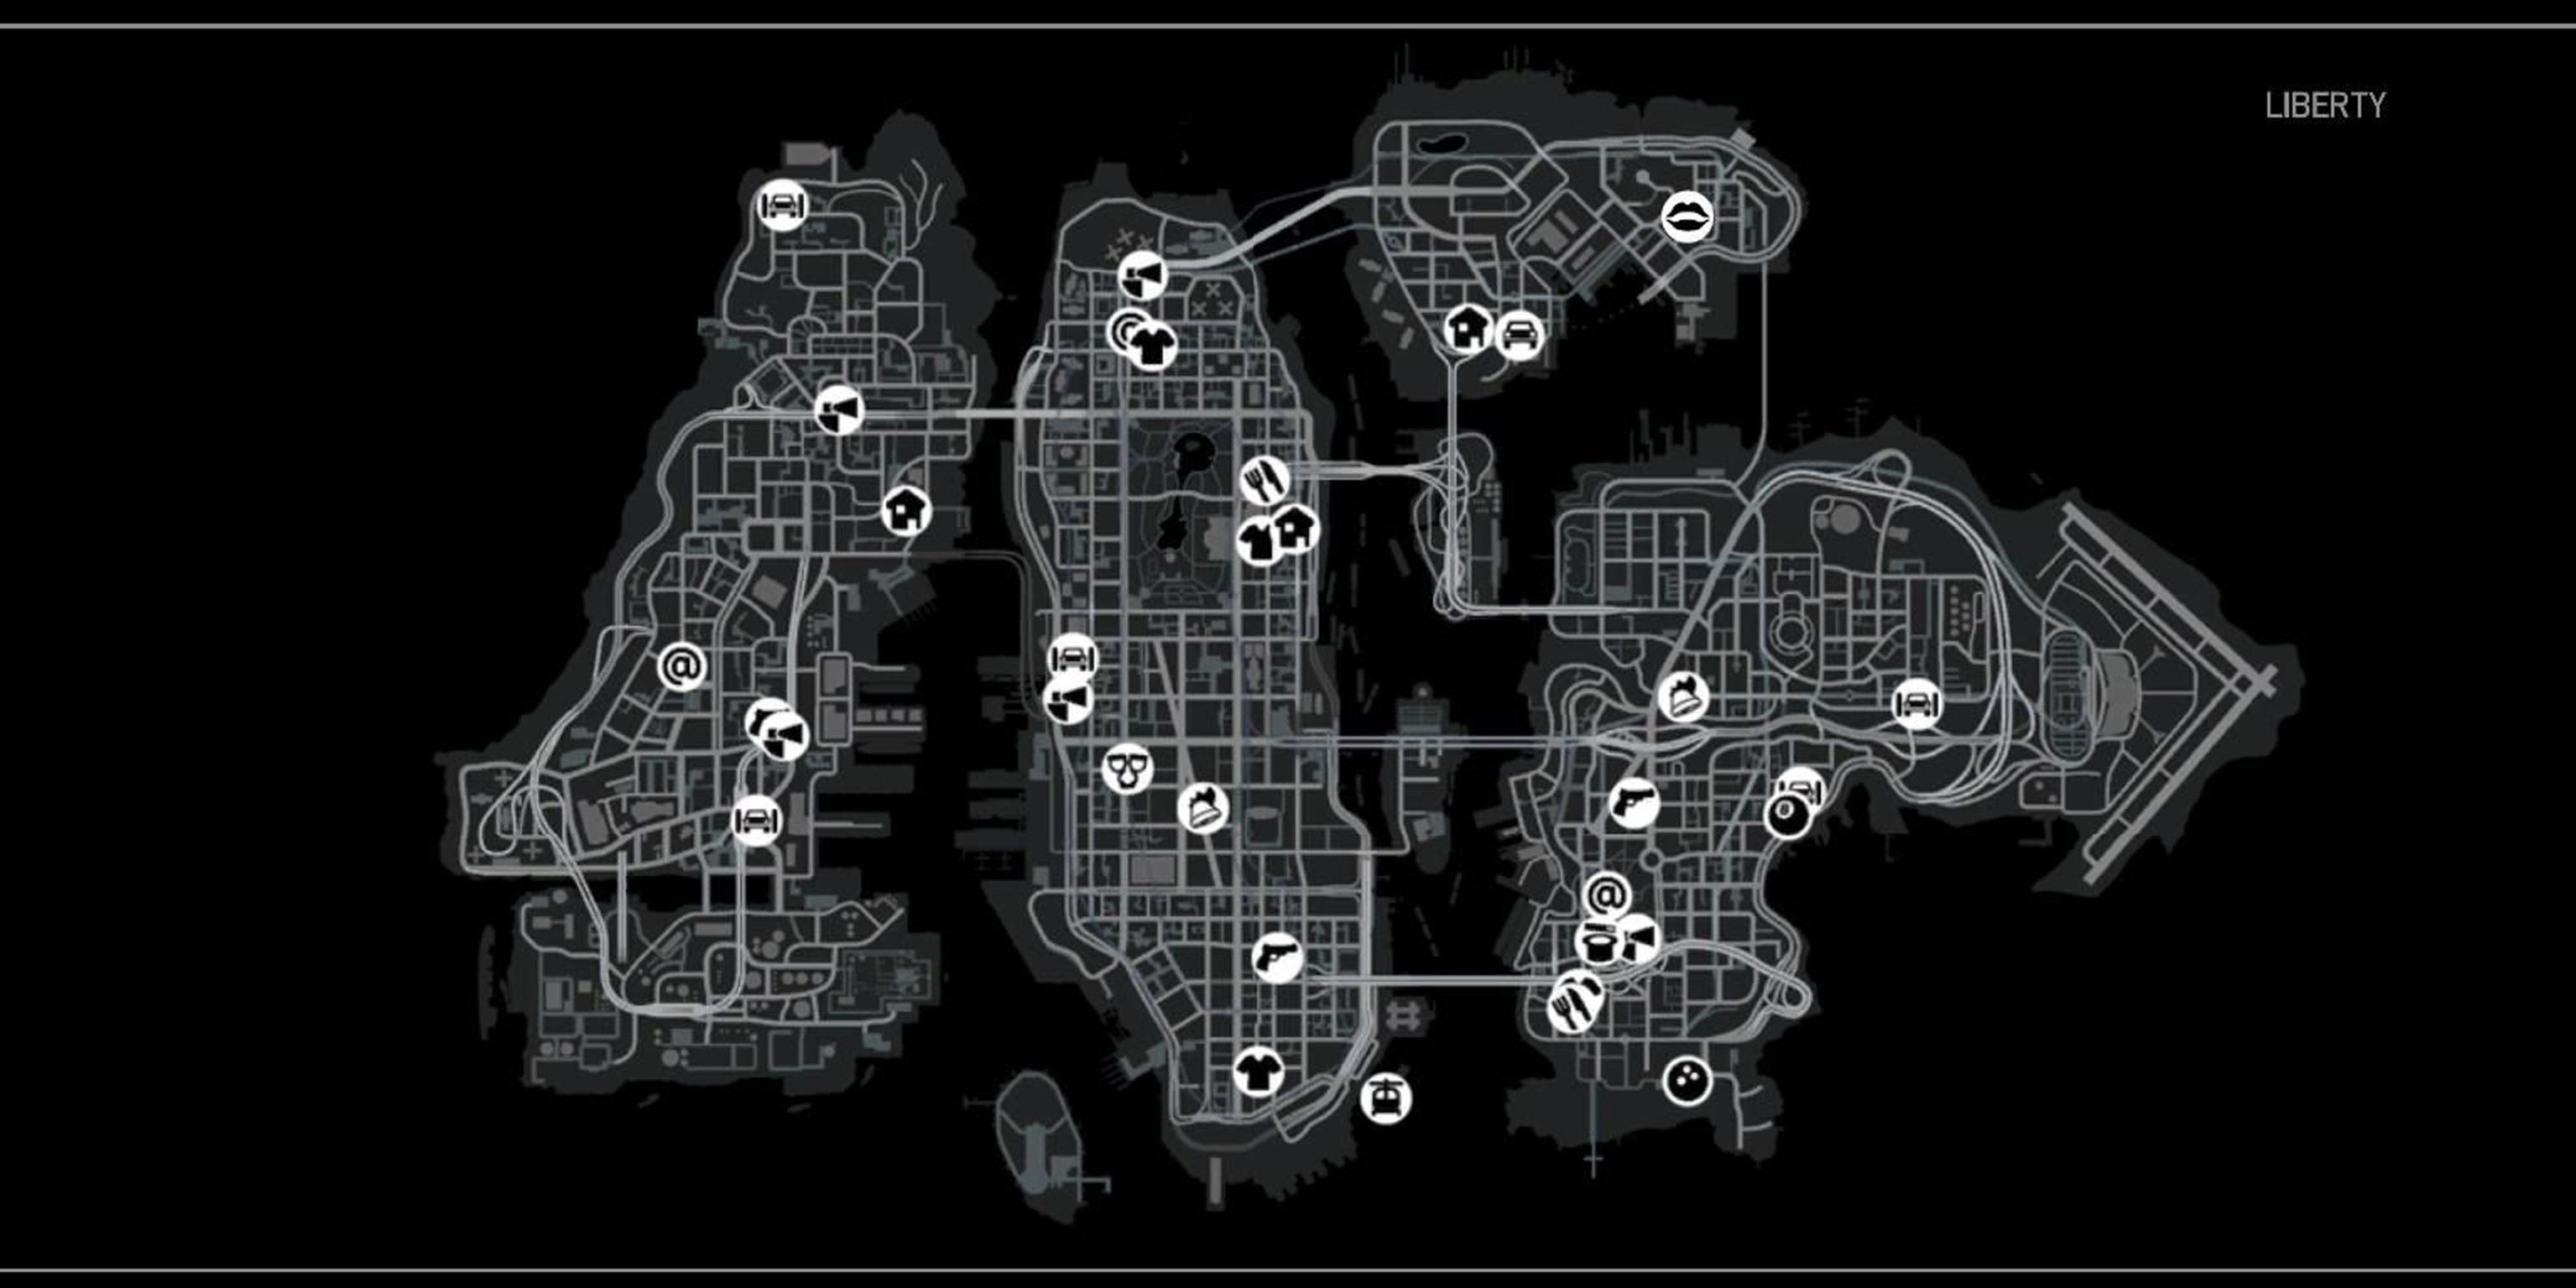 GTA4 Map Showing The Many Roads And Locations In The Game